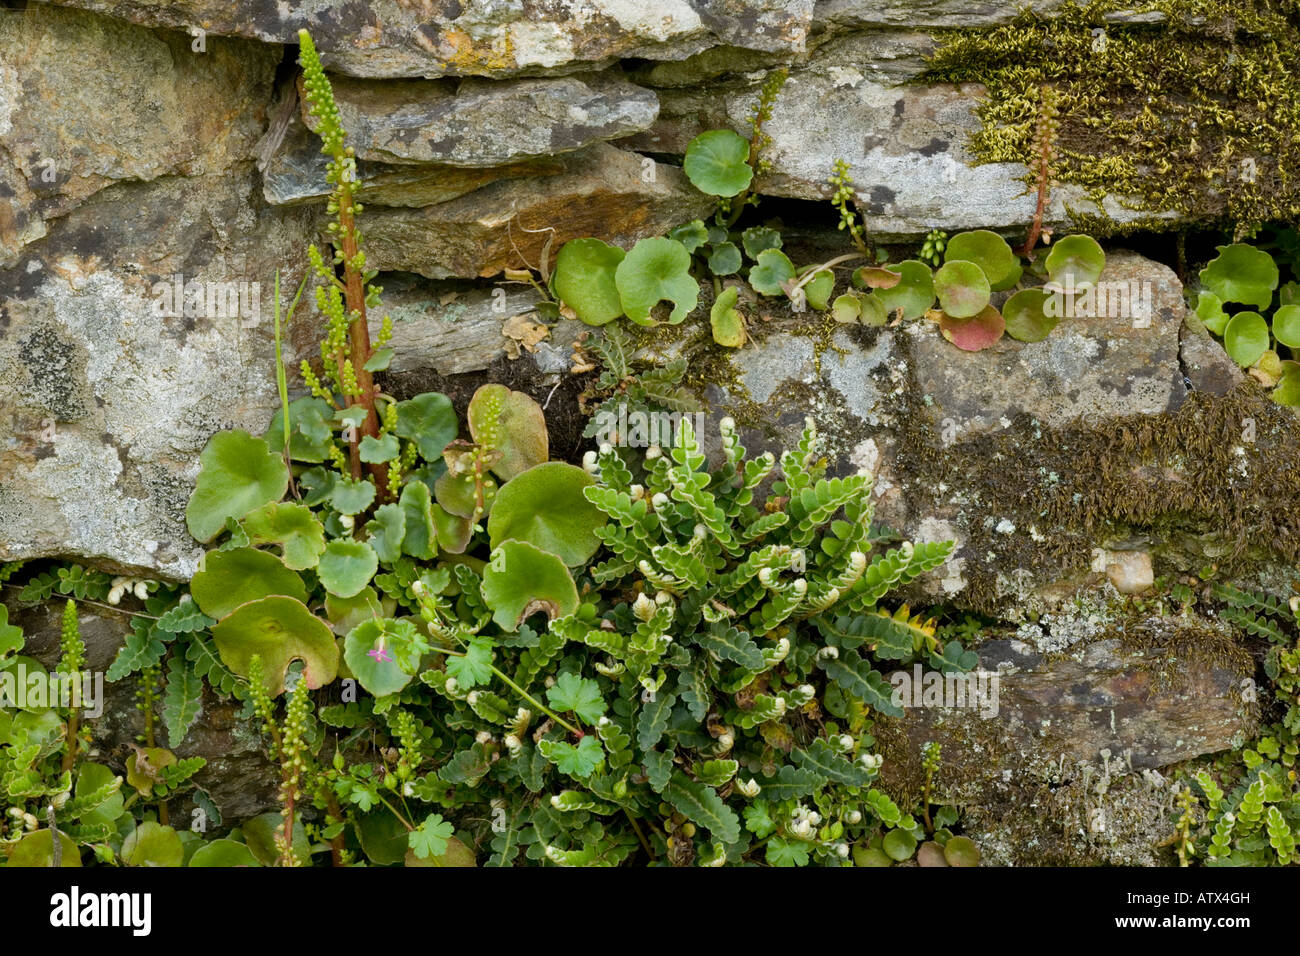 Wall pennywort, Umbilicus rupestris and Rusty back fern Ceterach officinarum on old wall Stock Photo